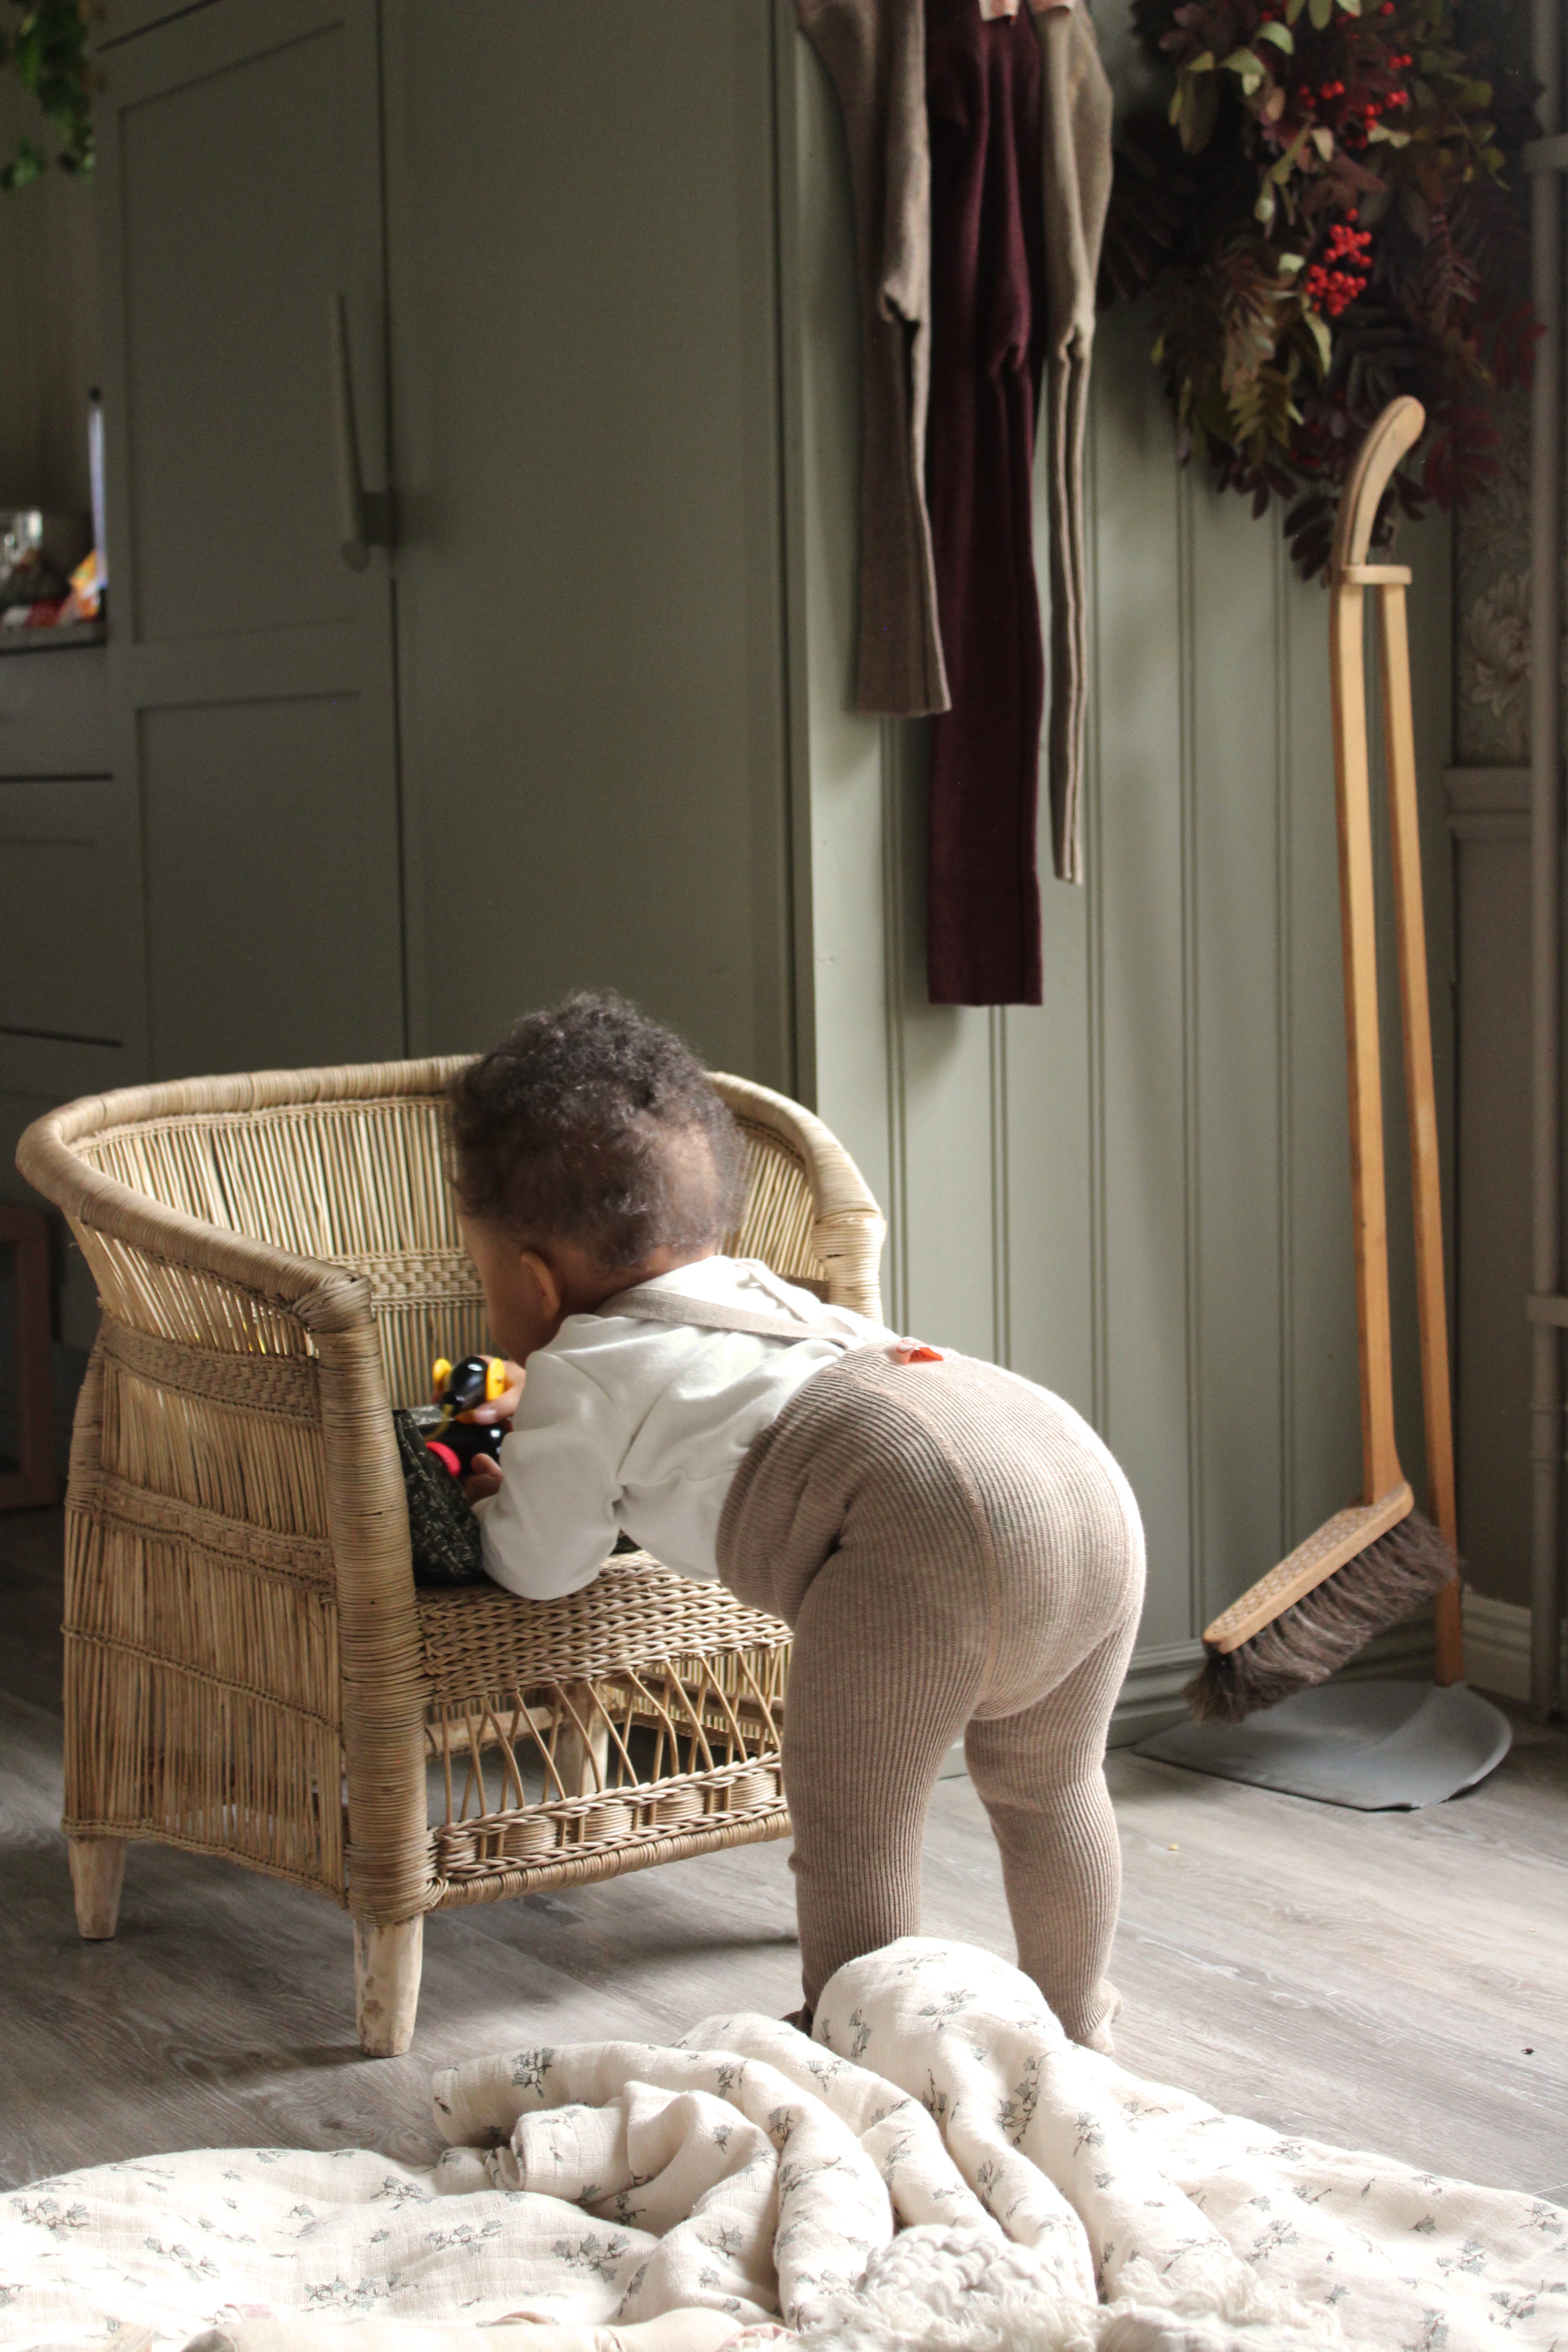 Silly Silas retro tights with braces will keep pace with even the most active babies and toddlers. Exceptionally resistant, lusciously soft and made from 100% organic cotton. Certified by OEKO-TEX® Standard 100 at the Class 1. (6632977694805)